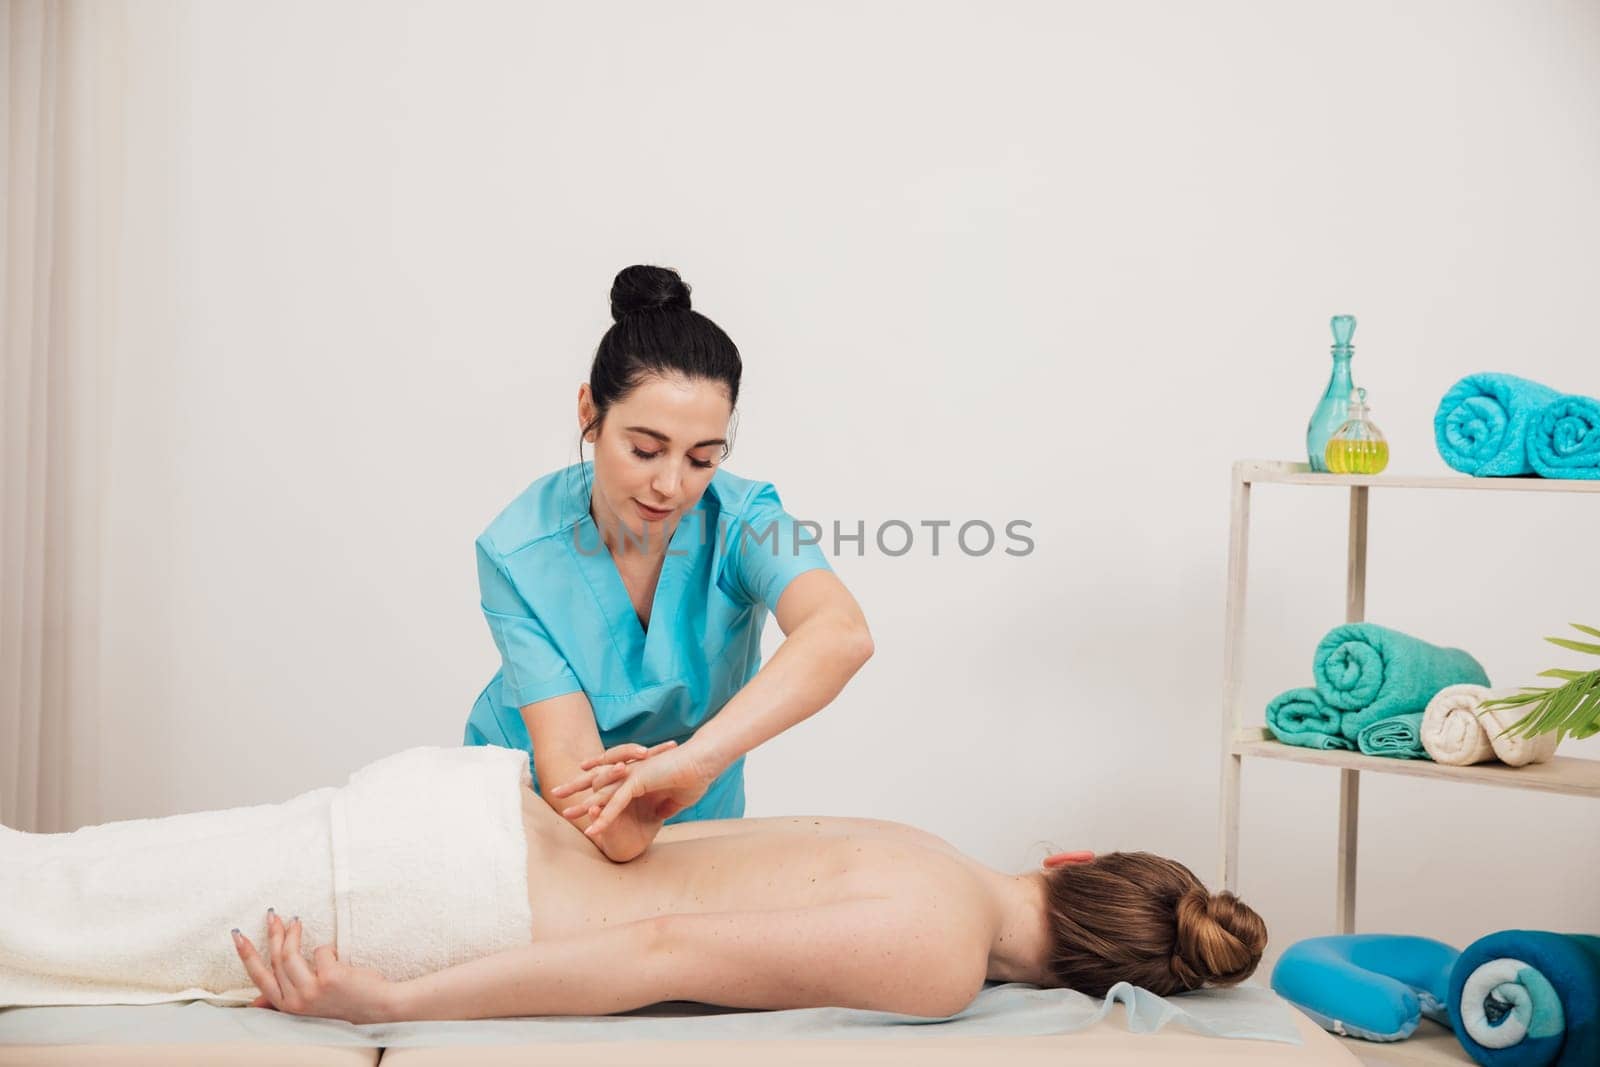 woman massage therapist makes client lower back massage relaxation relaxation osteopathy